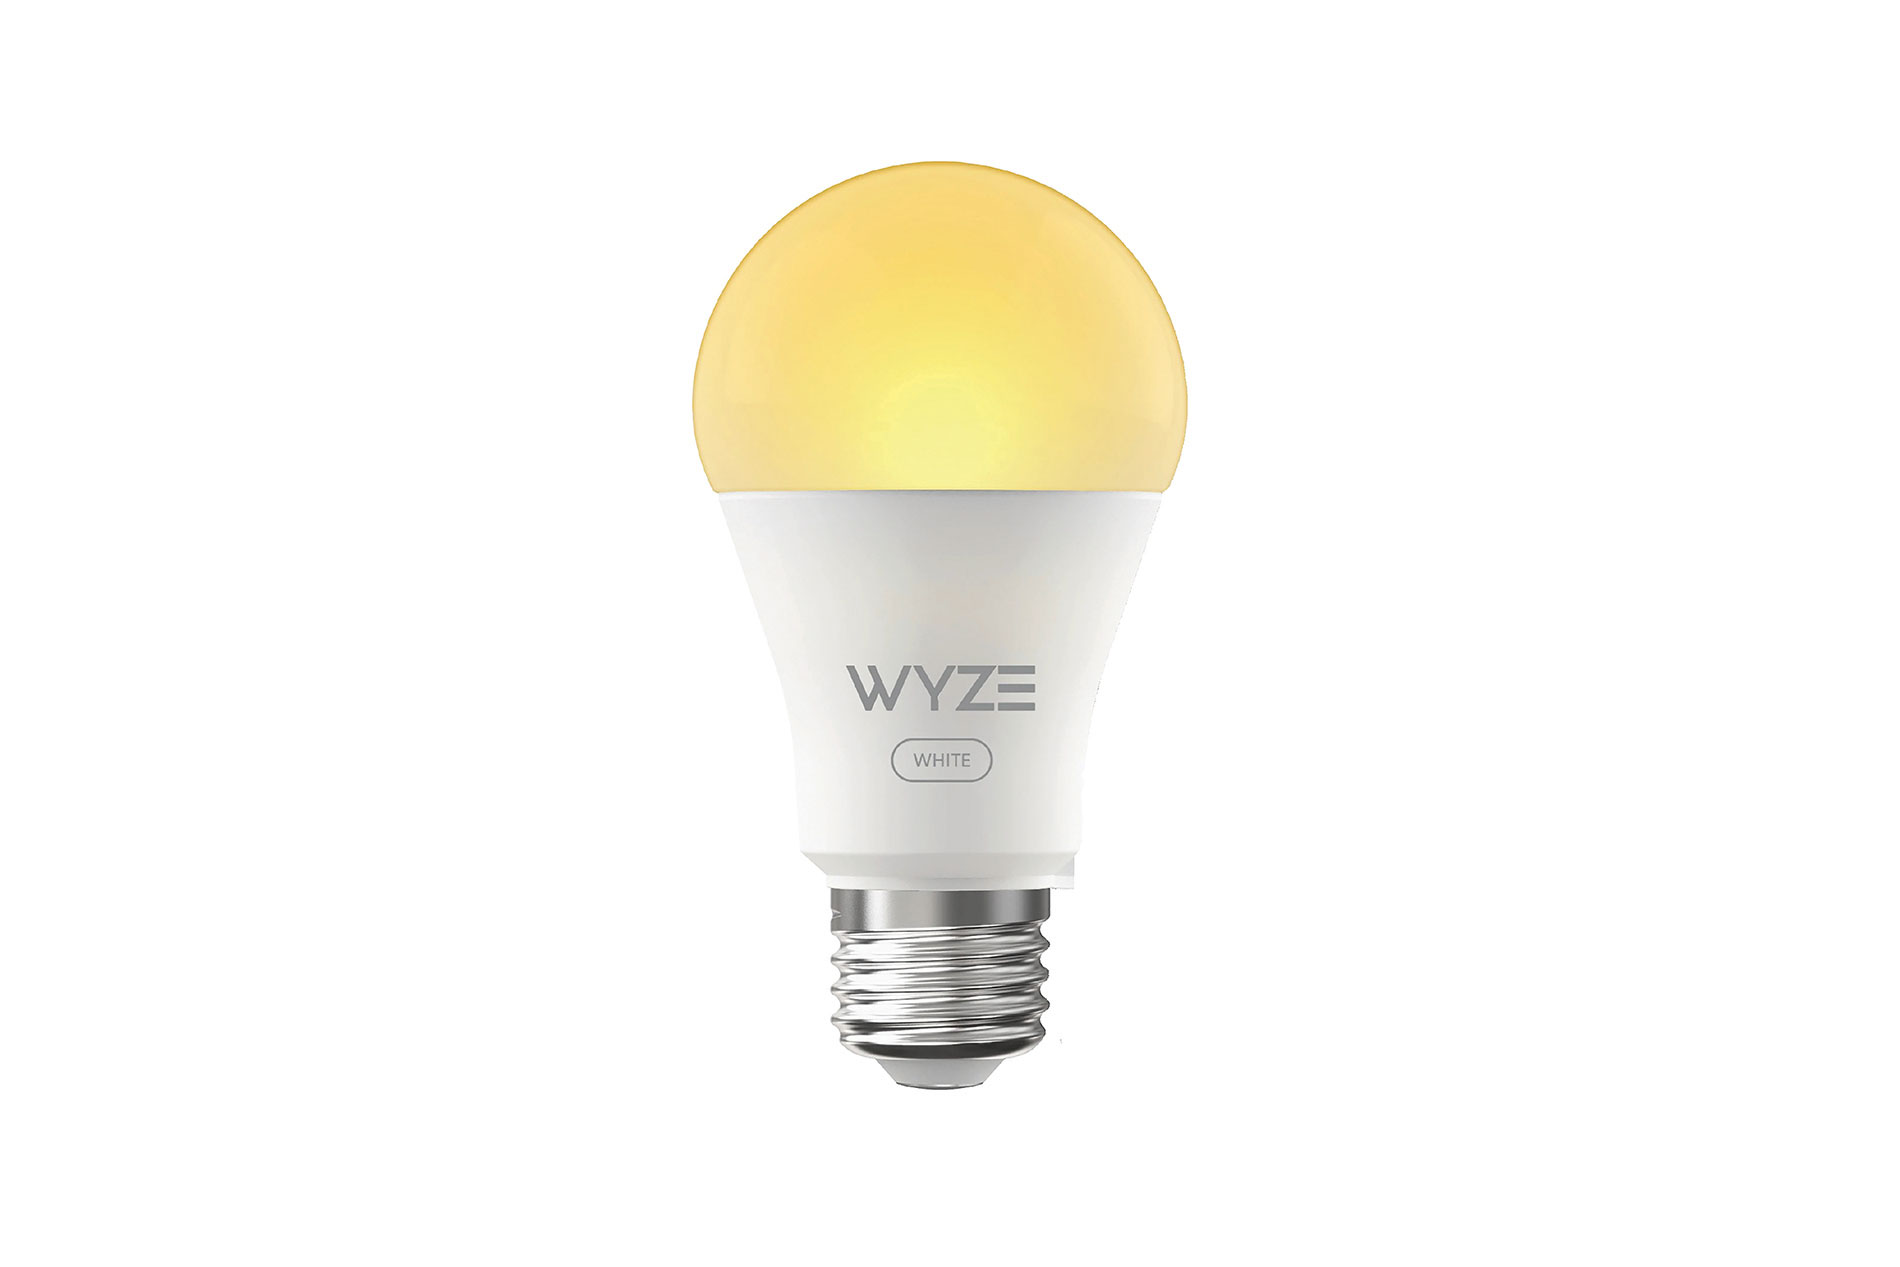 Yellow and white LED smart bulb. Image by Wyze.